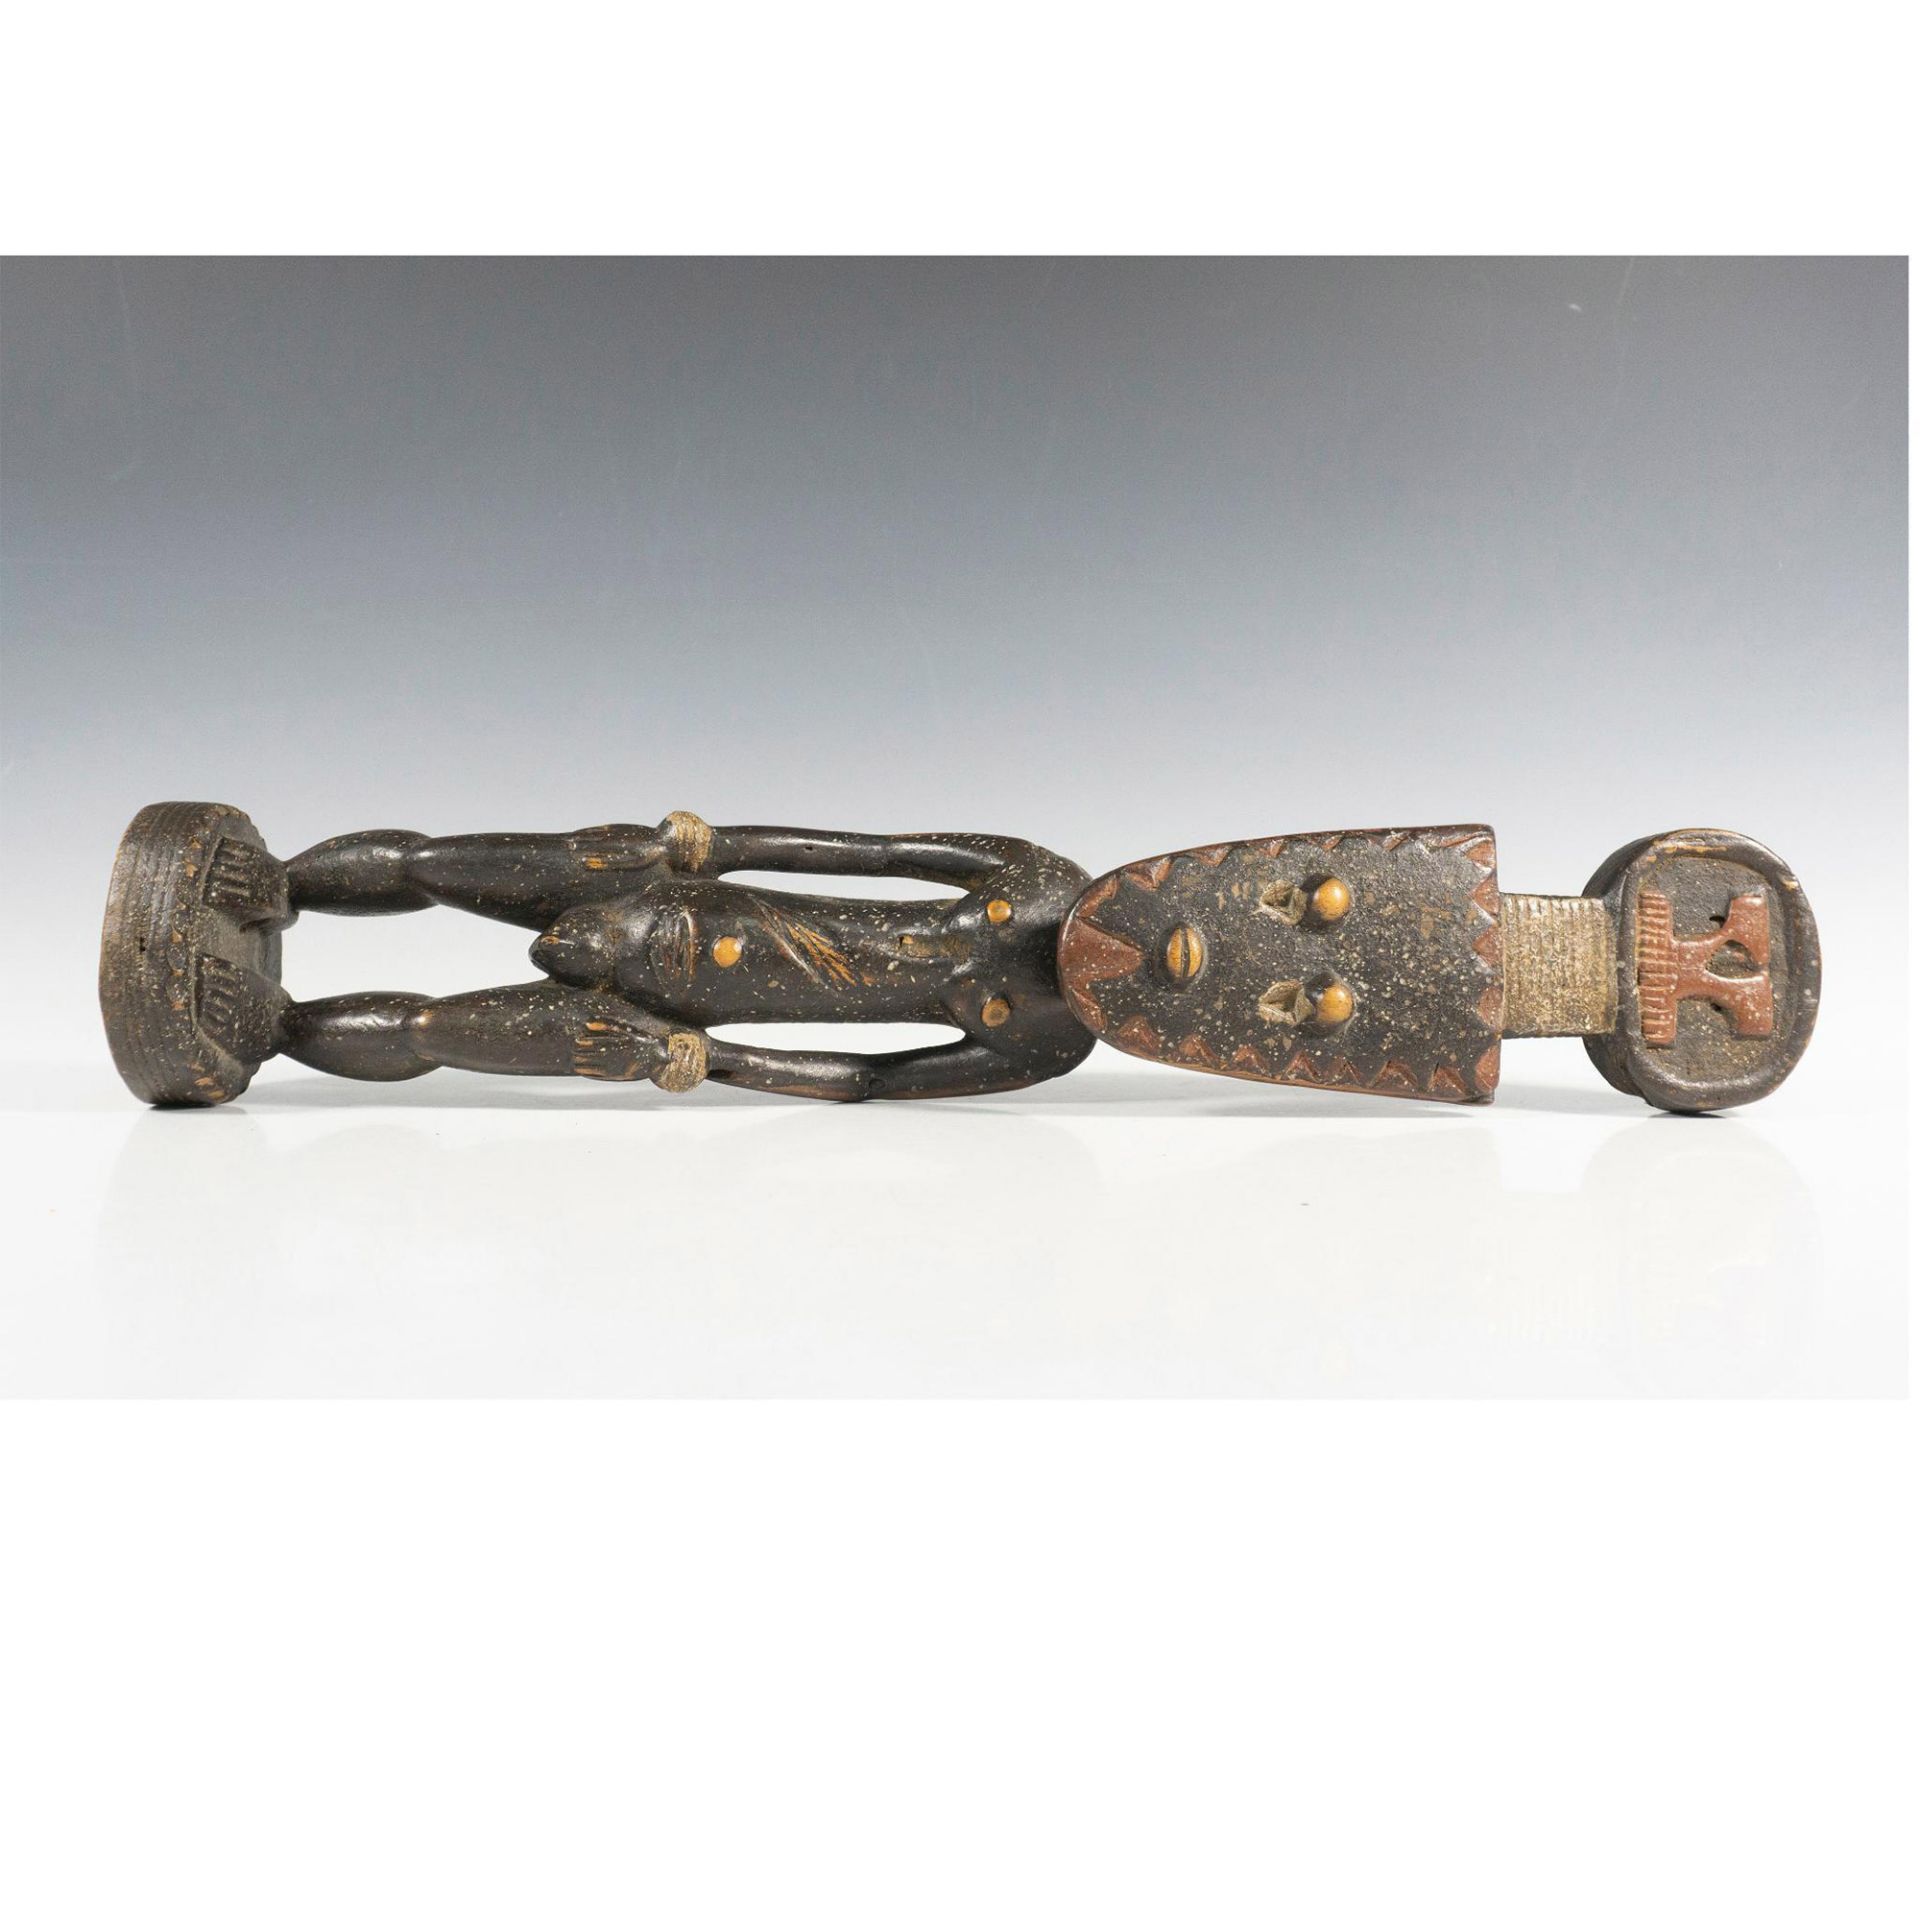 Wooden Tribal Figure with Mask - Image 3 of 5